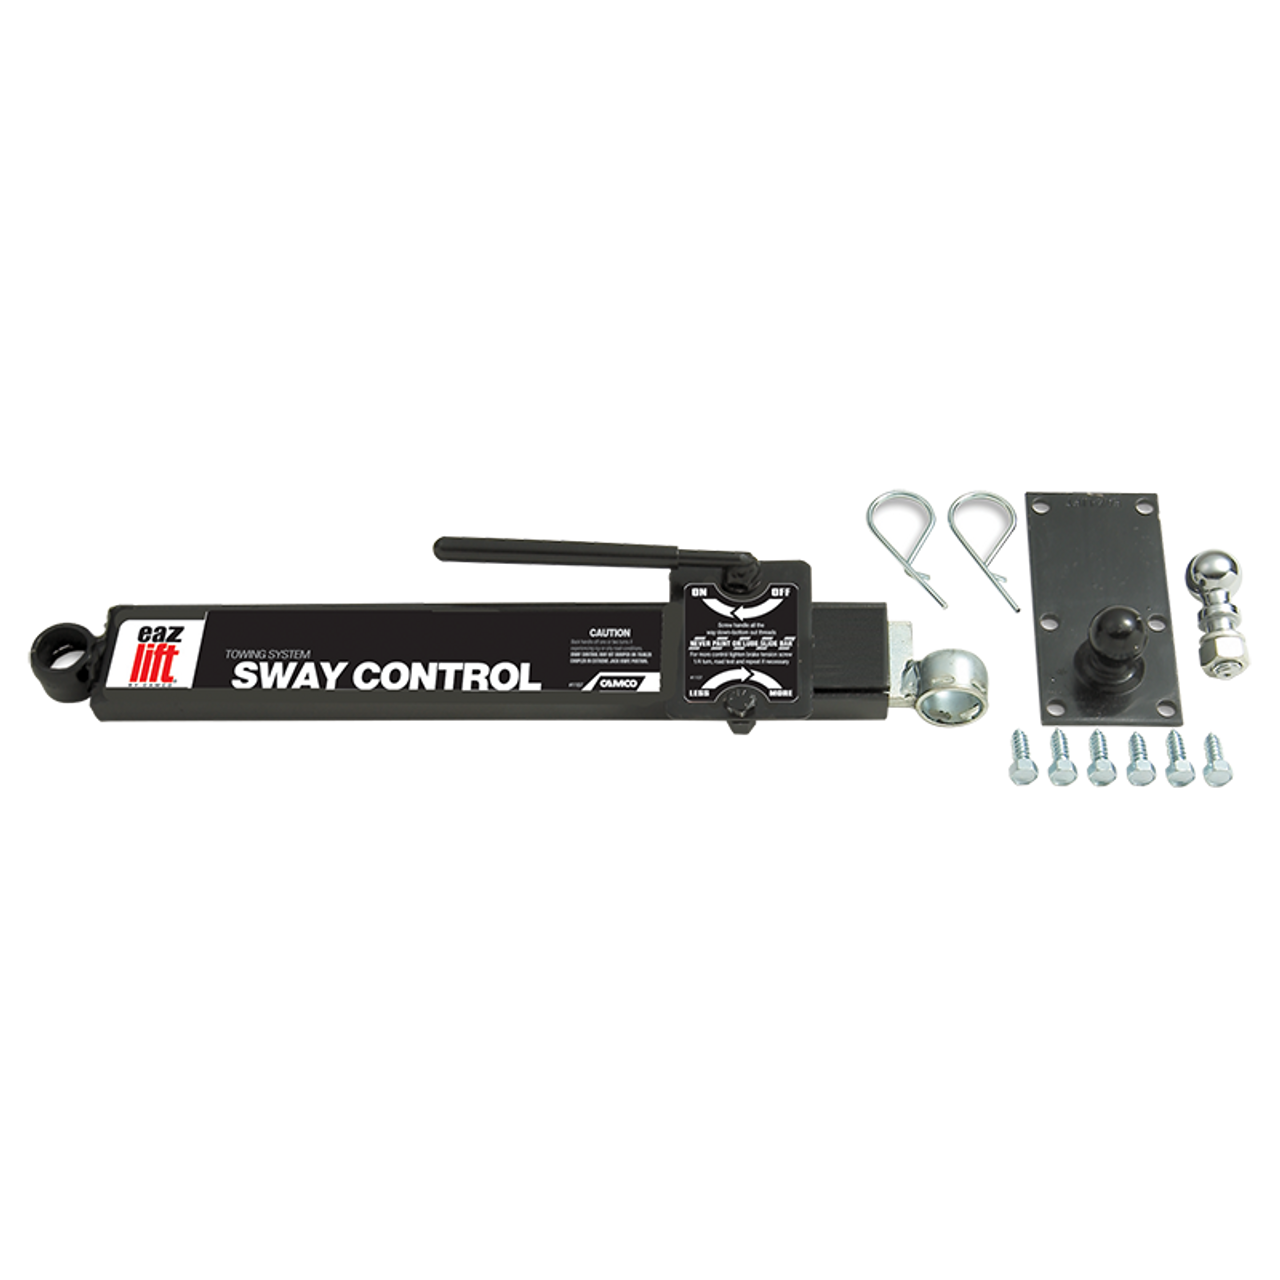 Eaz Lift Screw-On Sway Control-Drivers Side R/H Mounted. 48378/48380 | 350-05800